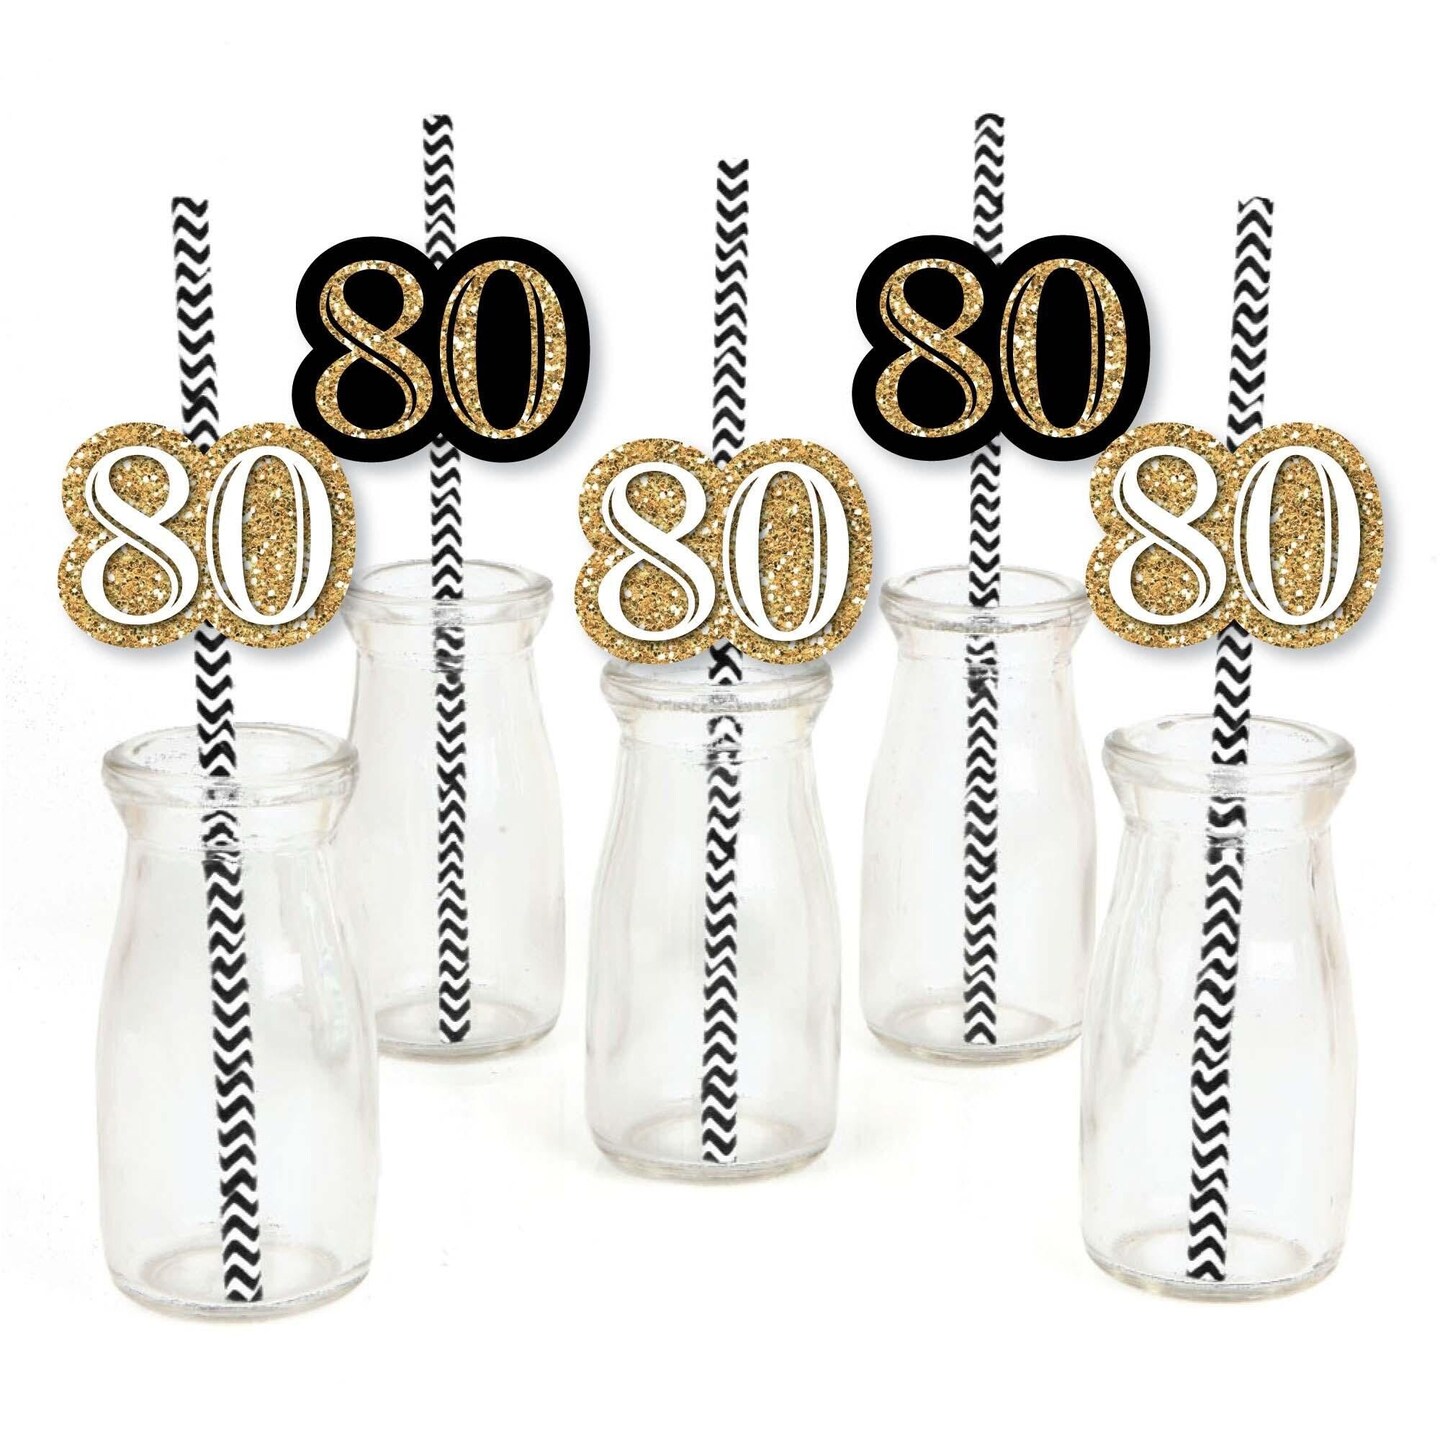 Big Dot of Happiness Adult 80th Birthday - Gold - Paper Straw Decor - Birthday Party Striped Decorative Straws - Set of 24